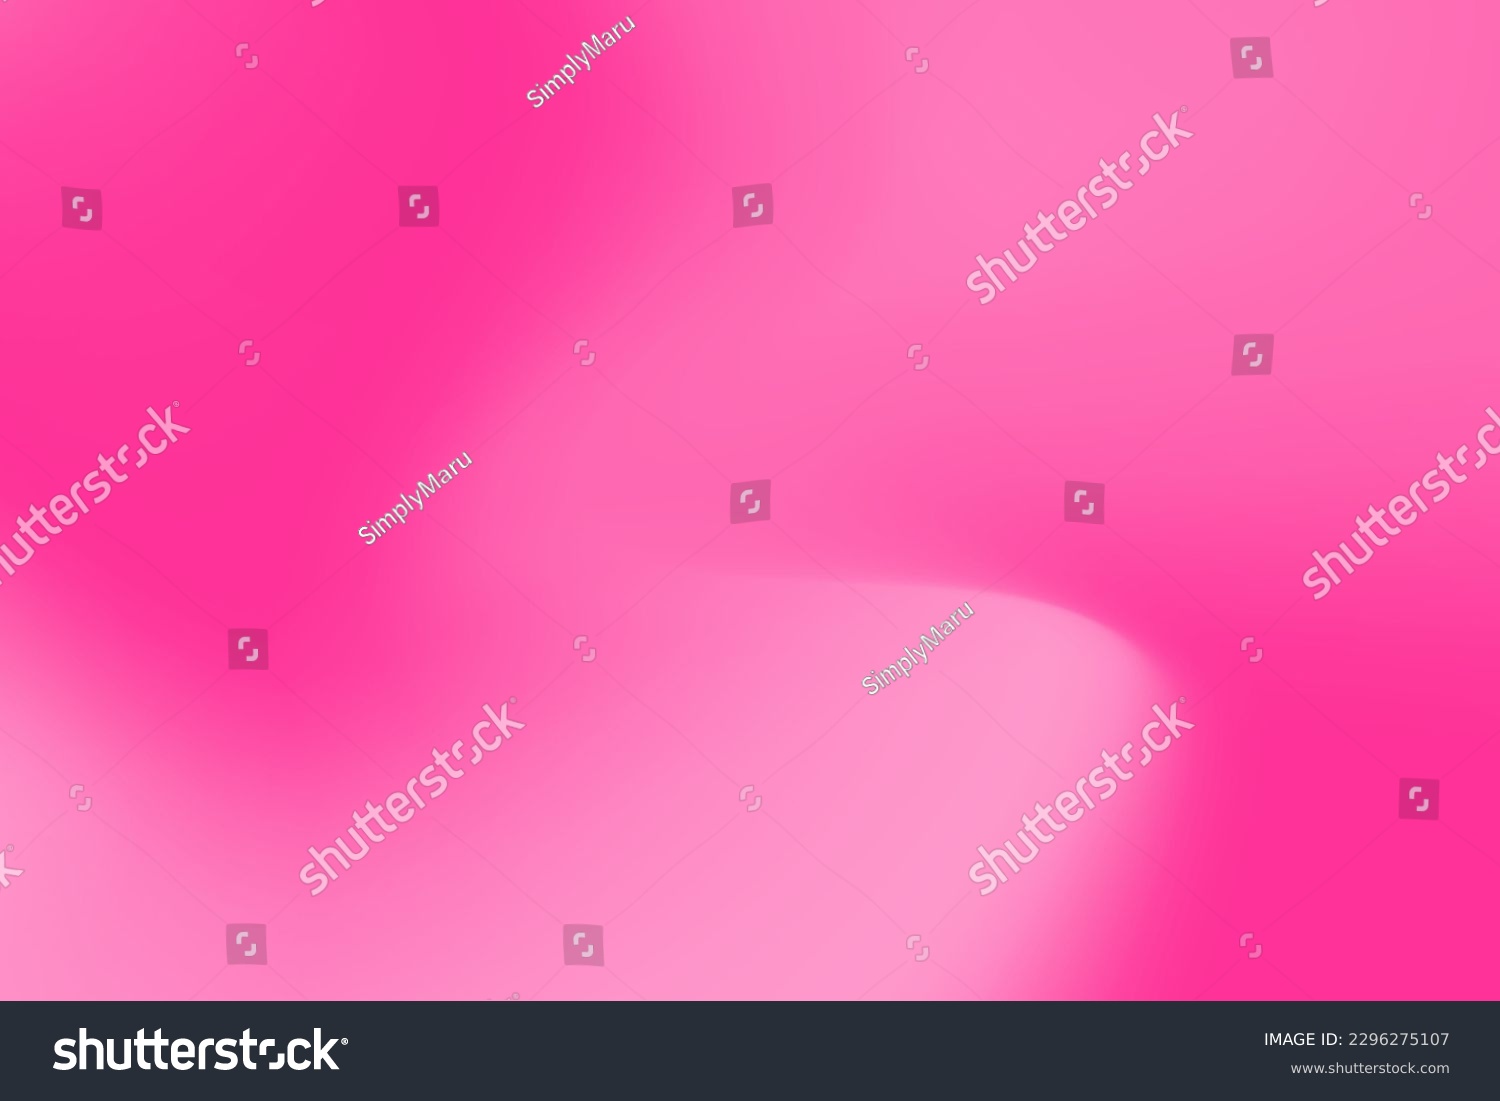 Tender pink gradient. Soft Classic Rose and French Fuchsia Pink Gradient Background. Beautiful Pink motion backdrop. Vector Illustration. EPS 10. #2296275107